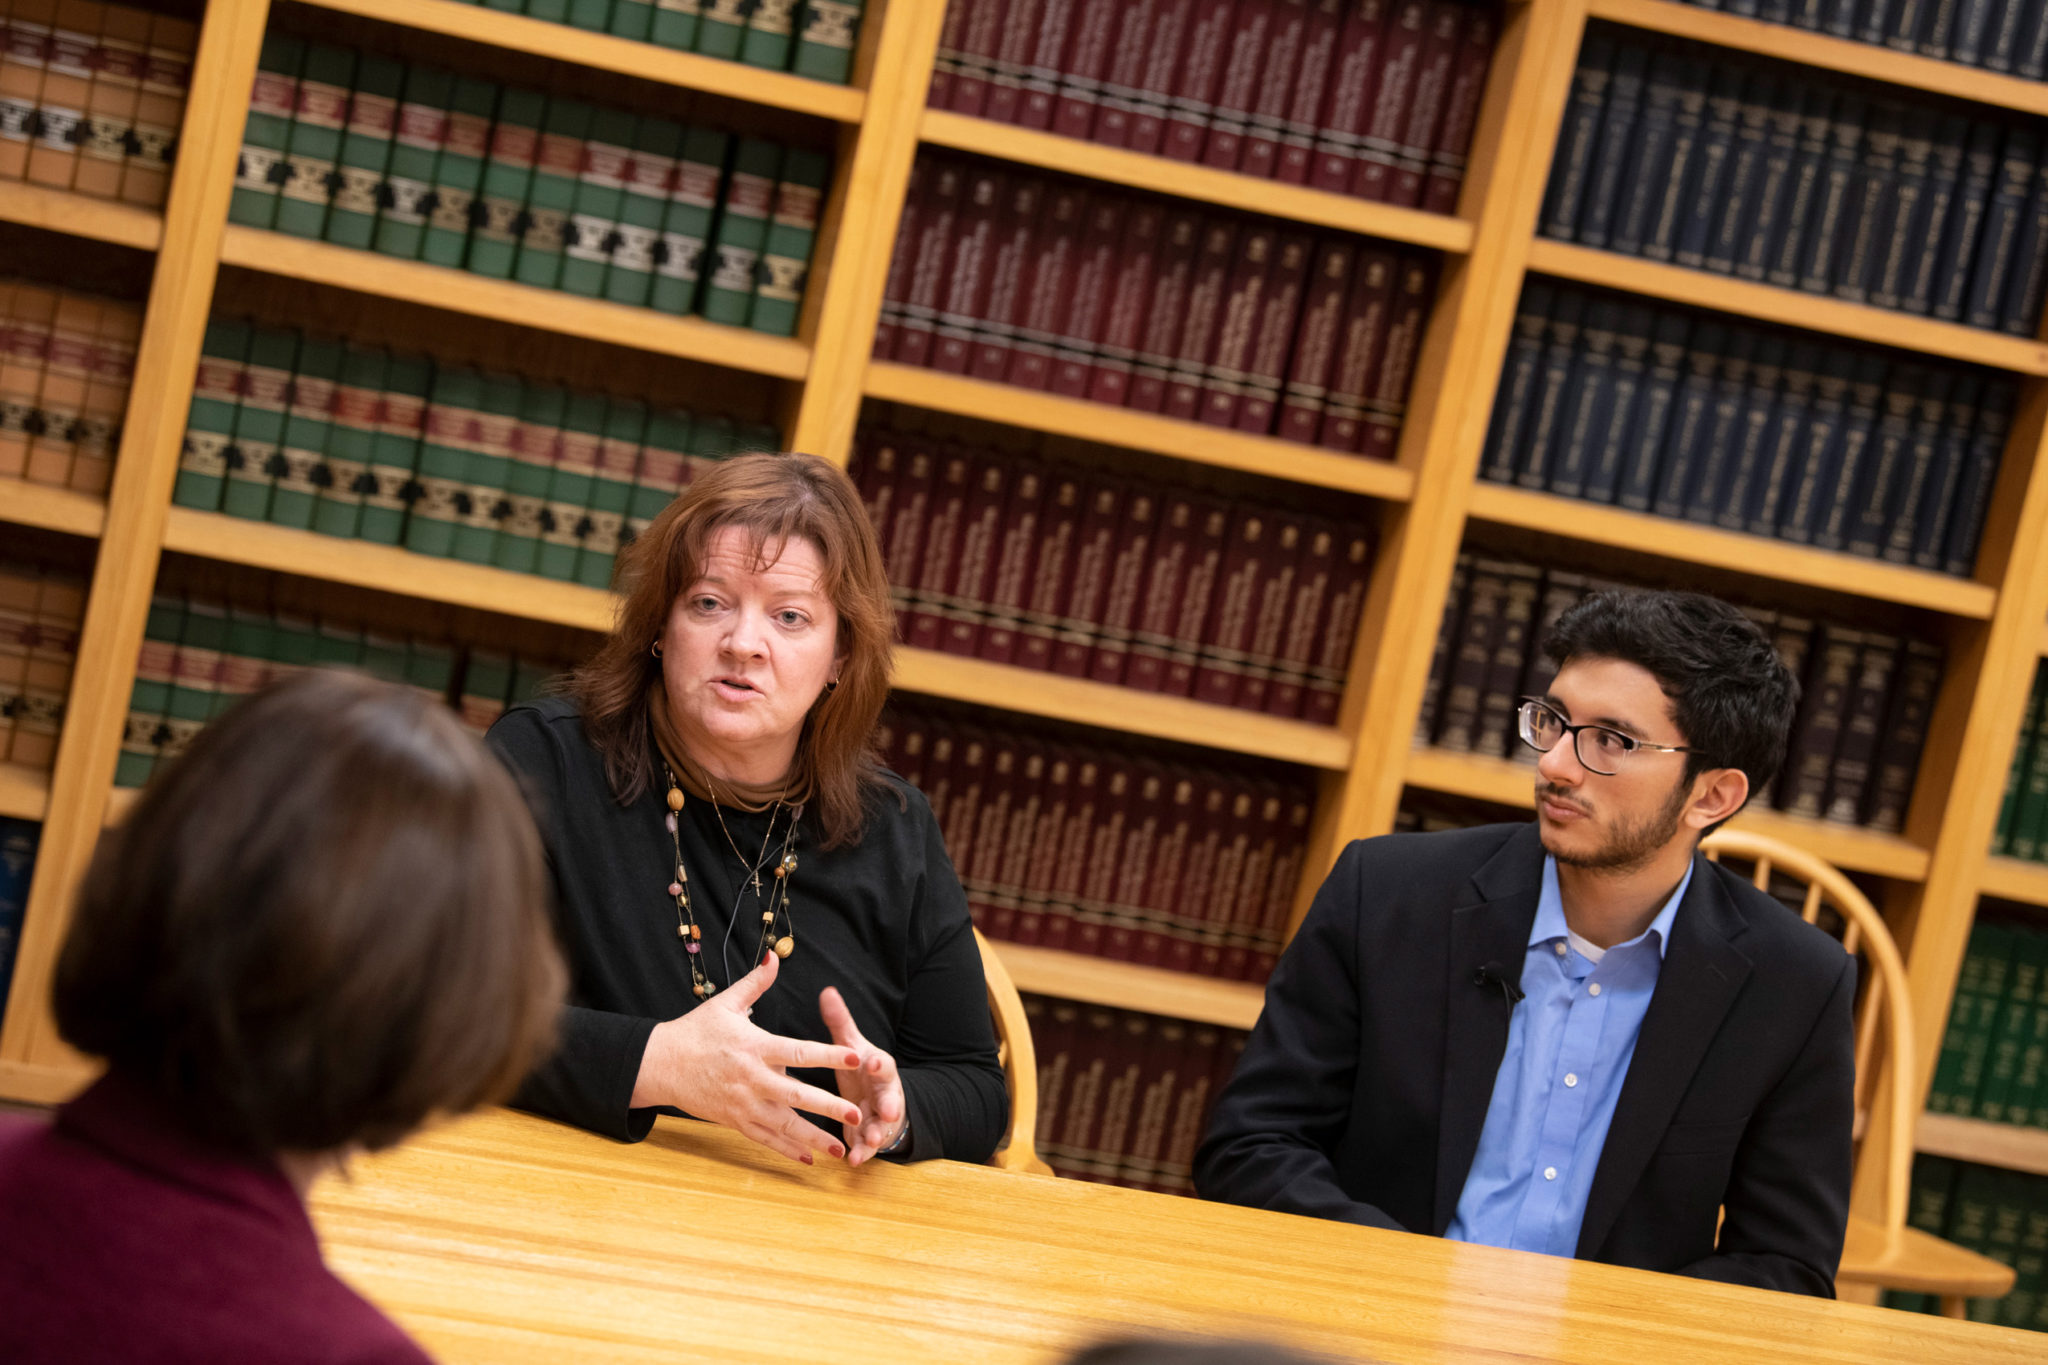 Julie McCormack (left) sits with student at the WilmerHale Legal Services Center